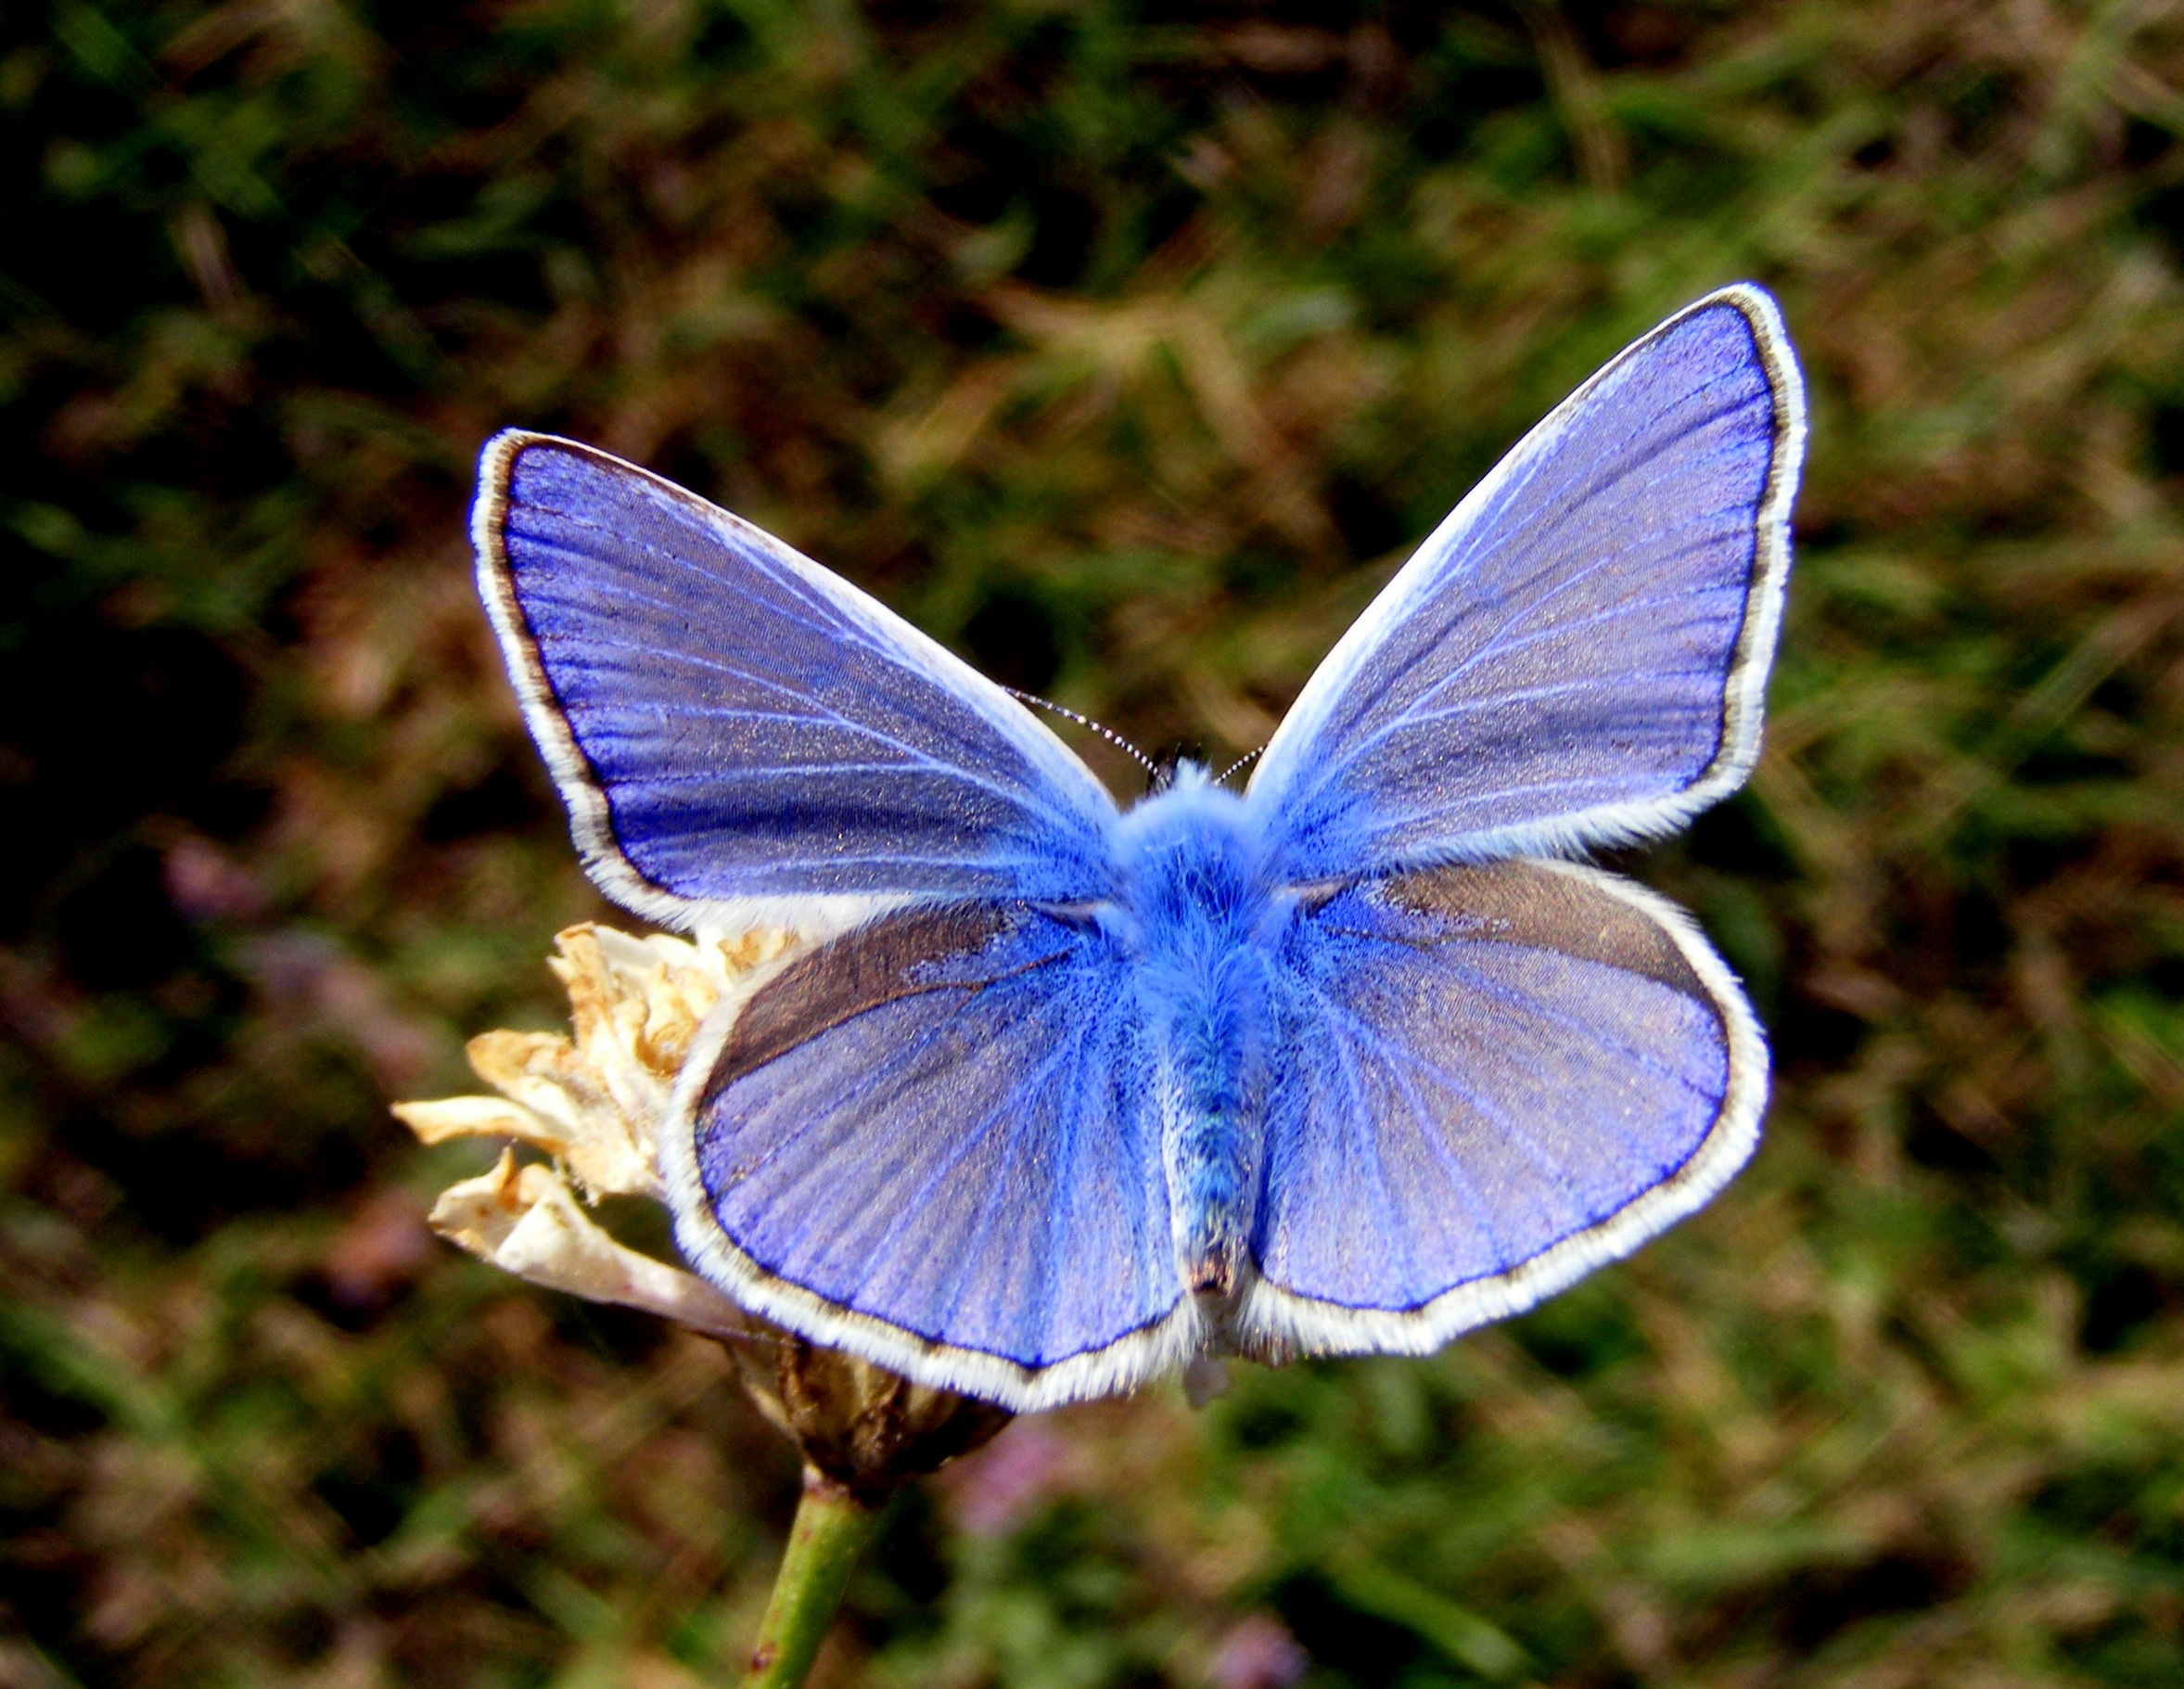 Blue butterfly photo